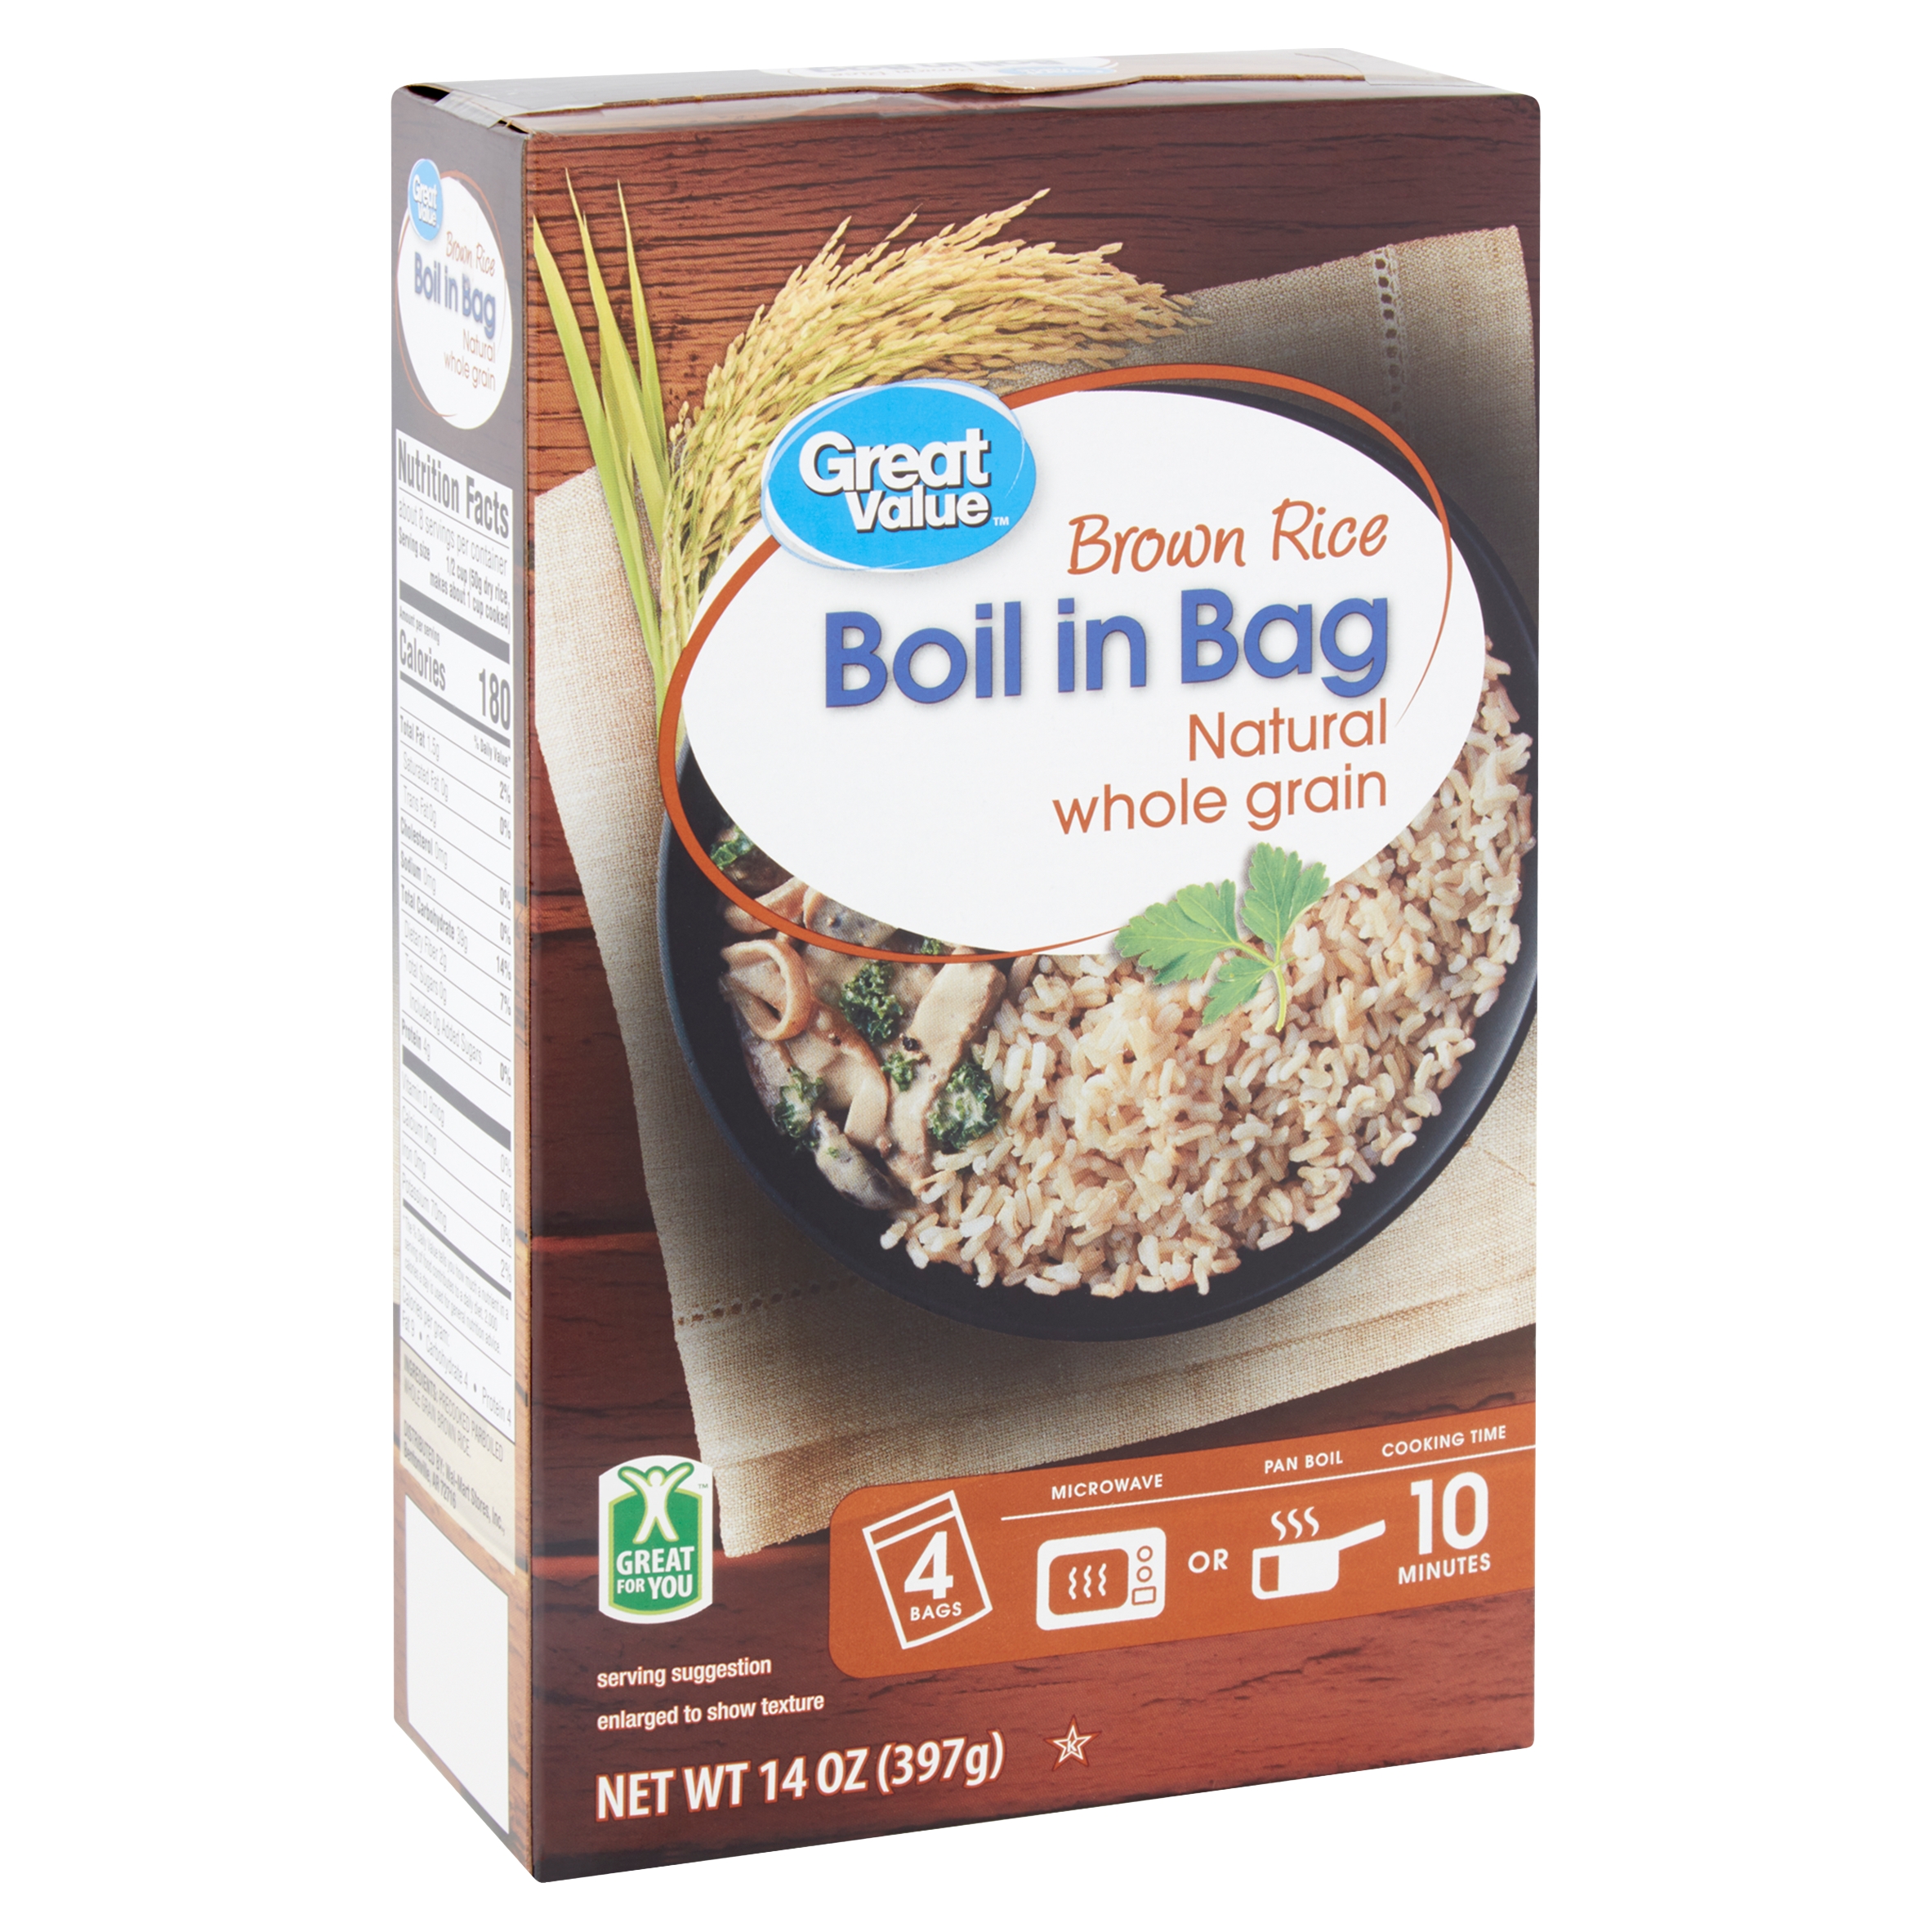 Great Value Boil in Bag Brown Rice, 4 Count, 14 Oz